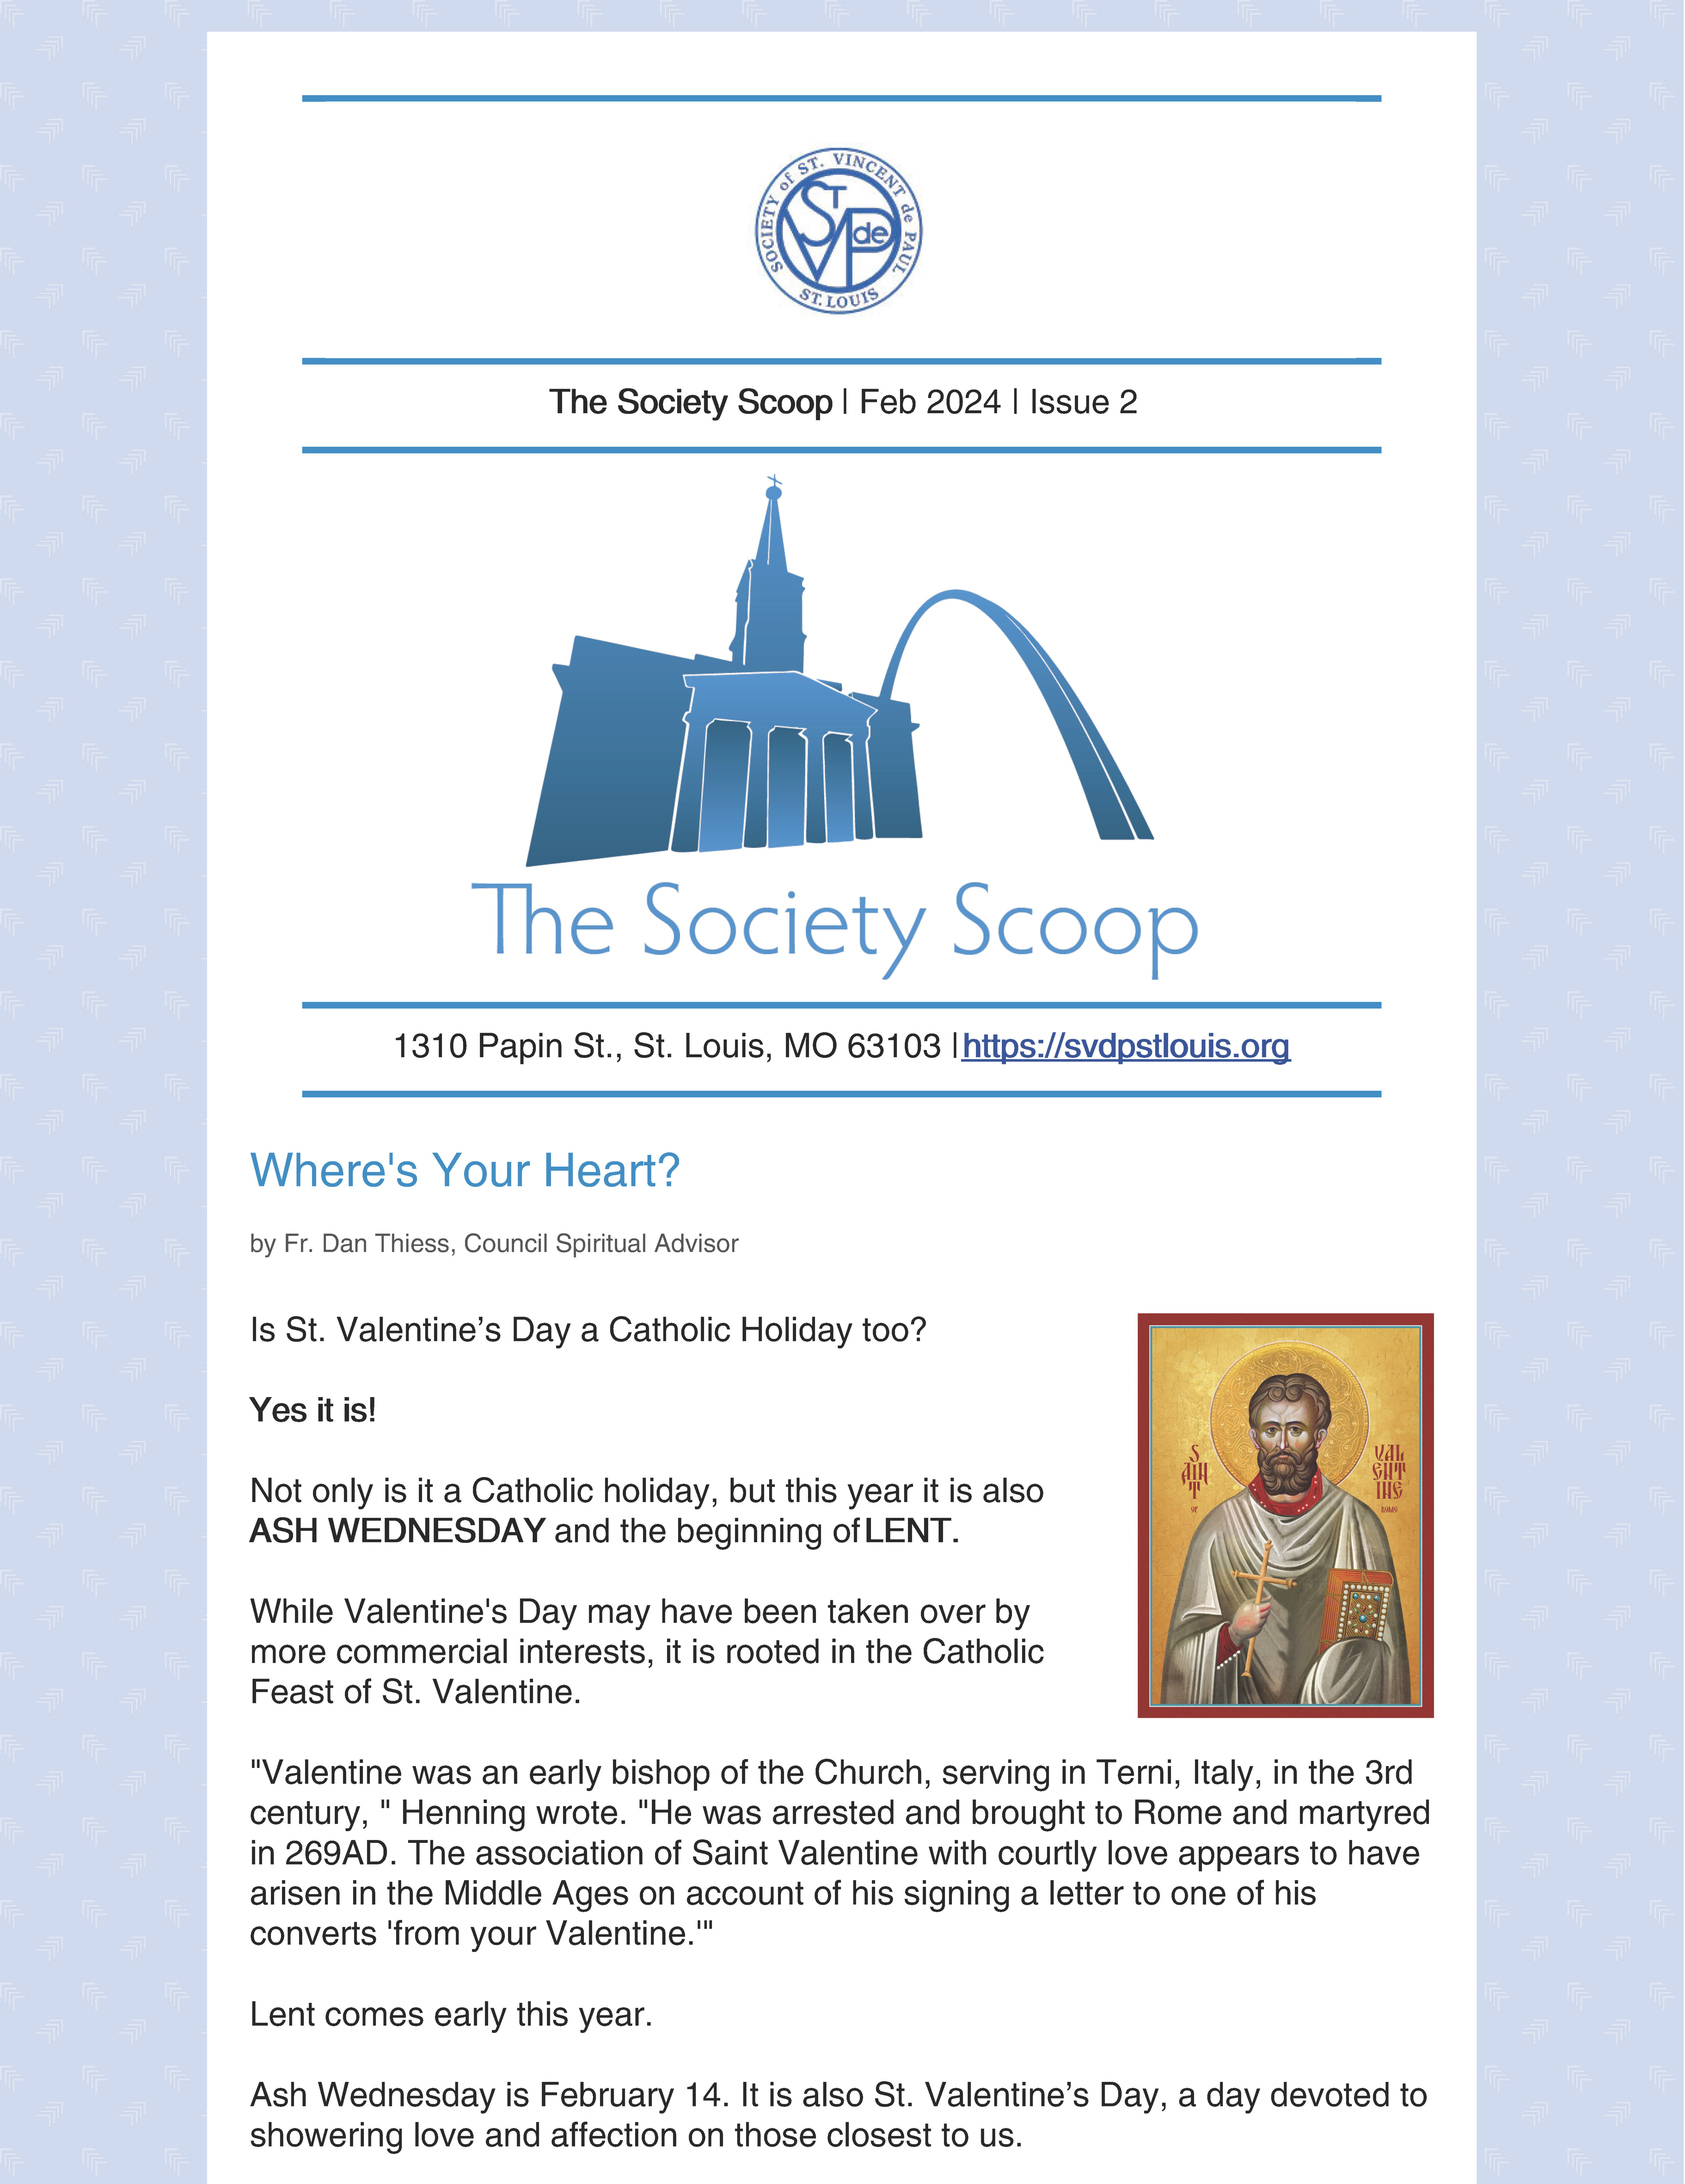 The Society Scoop February 2024 Issue 2